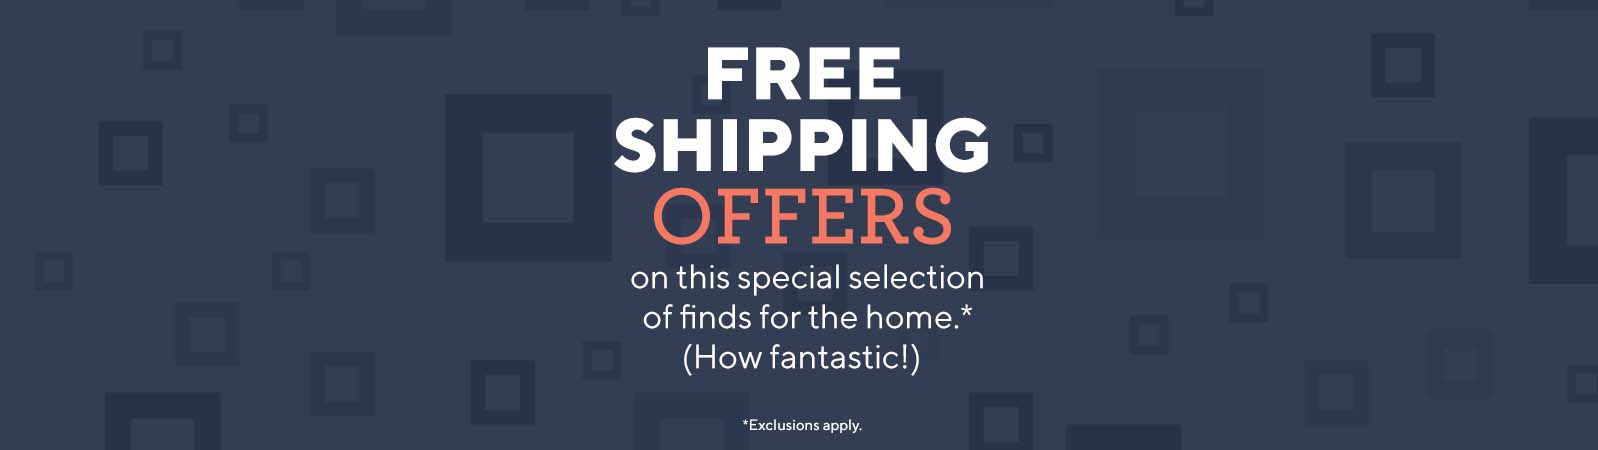 Latest QVC Free Shipping Code for Select Orders